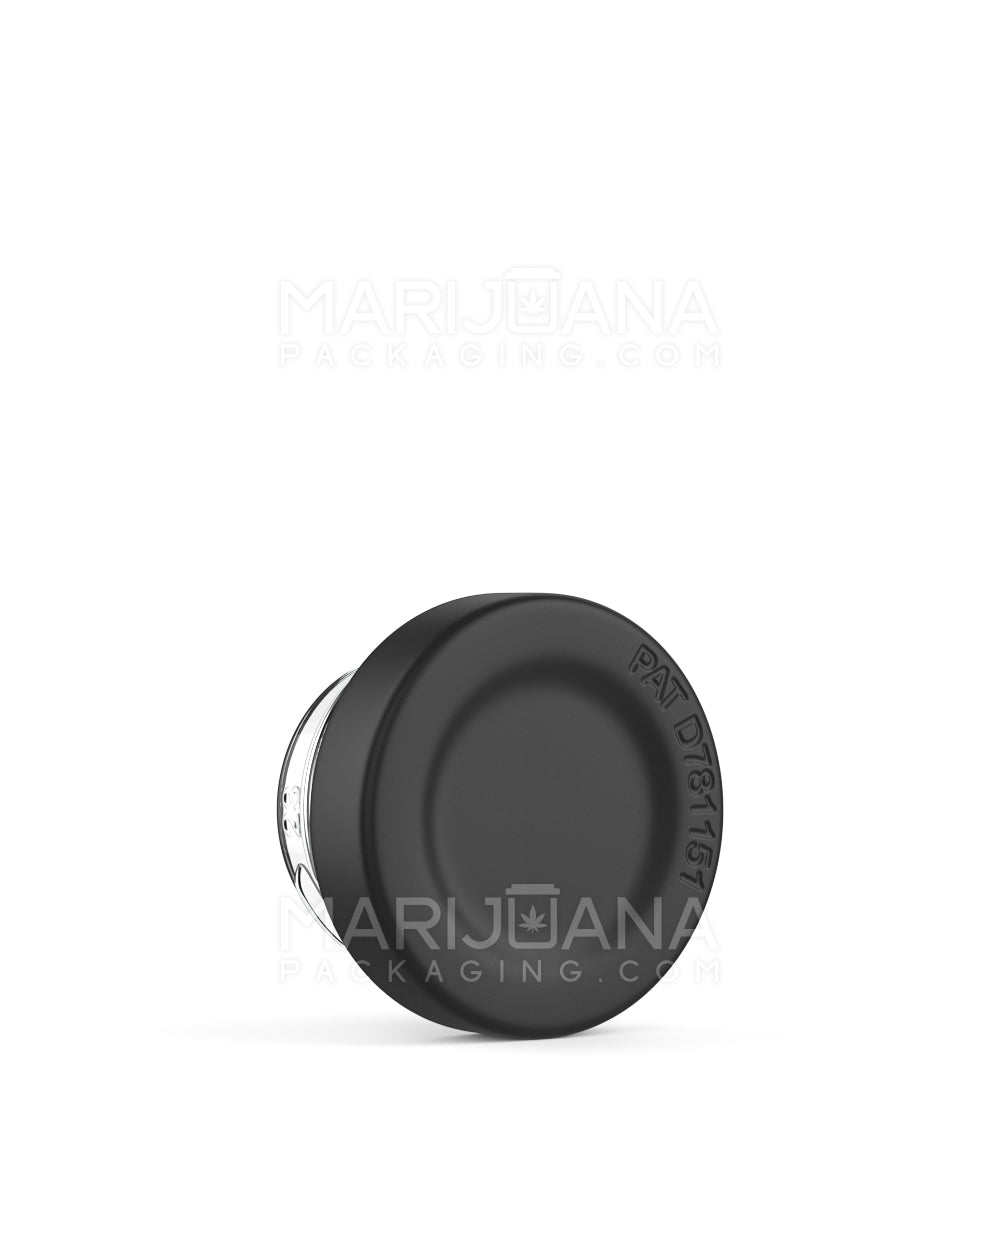 Matte Black Glass Concentrate Containers | 28mm - 5mL - 504 Count - 4